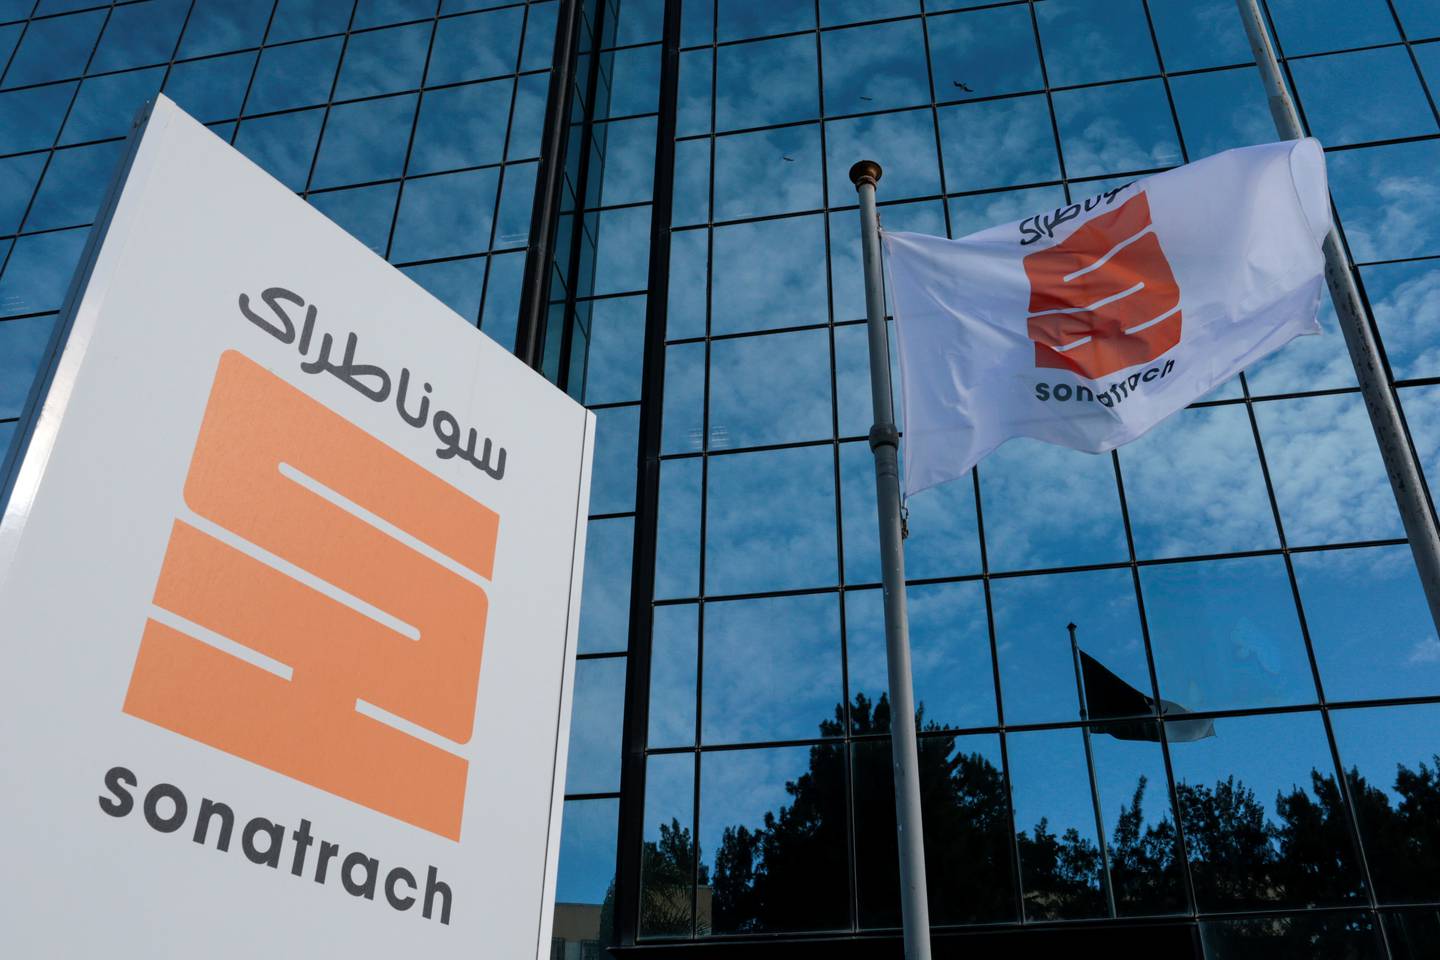 State energy company Sonatrach says it can increase capacity. Reuters